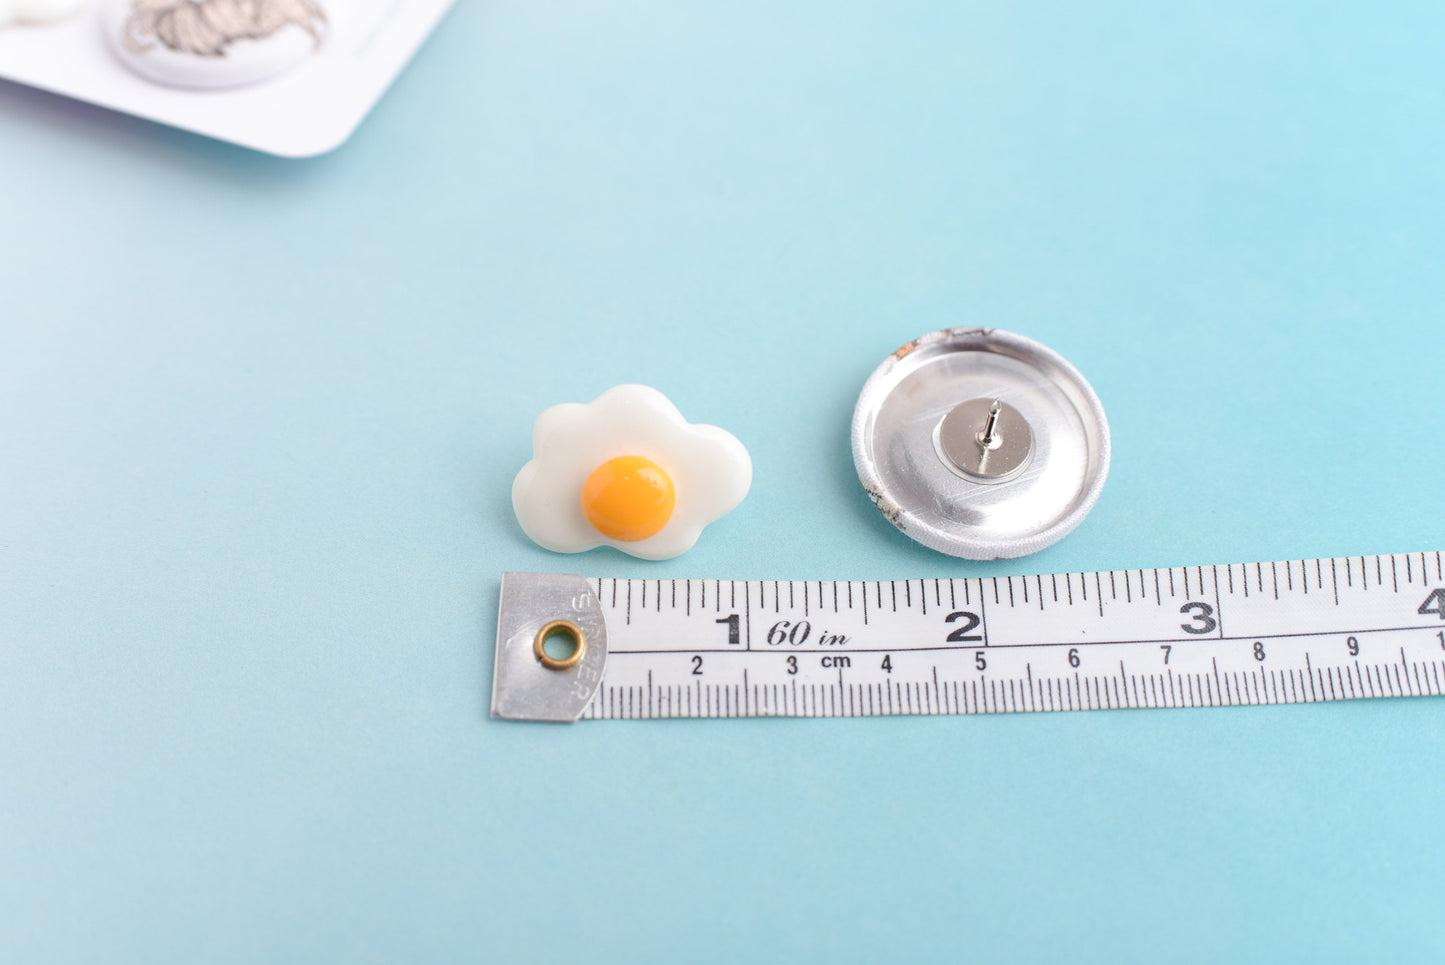 Fabric Button Chicken and Resin Egg Lapel Pin Set